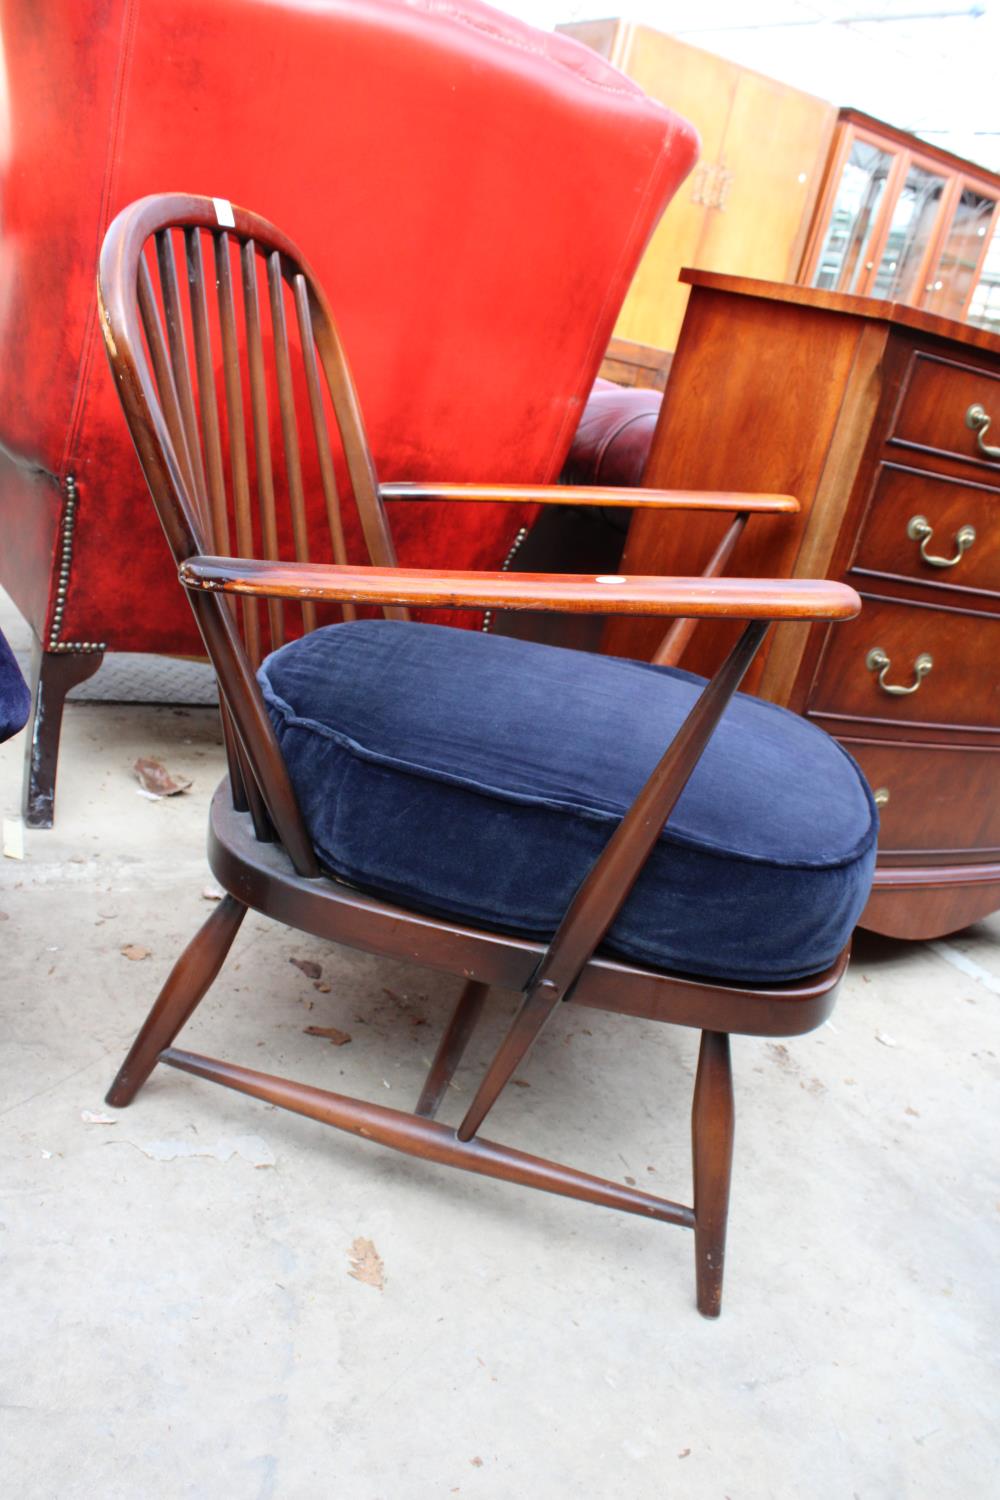 AN ERCOL STYLE FIRESIDE CHAIR WITH SPINDLE BACK - Image 2 of 3